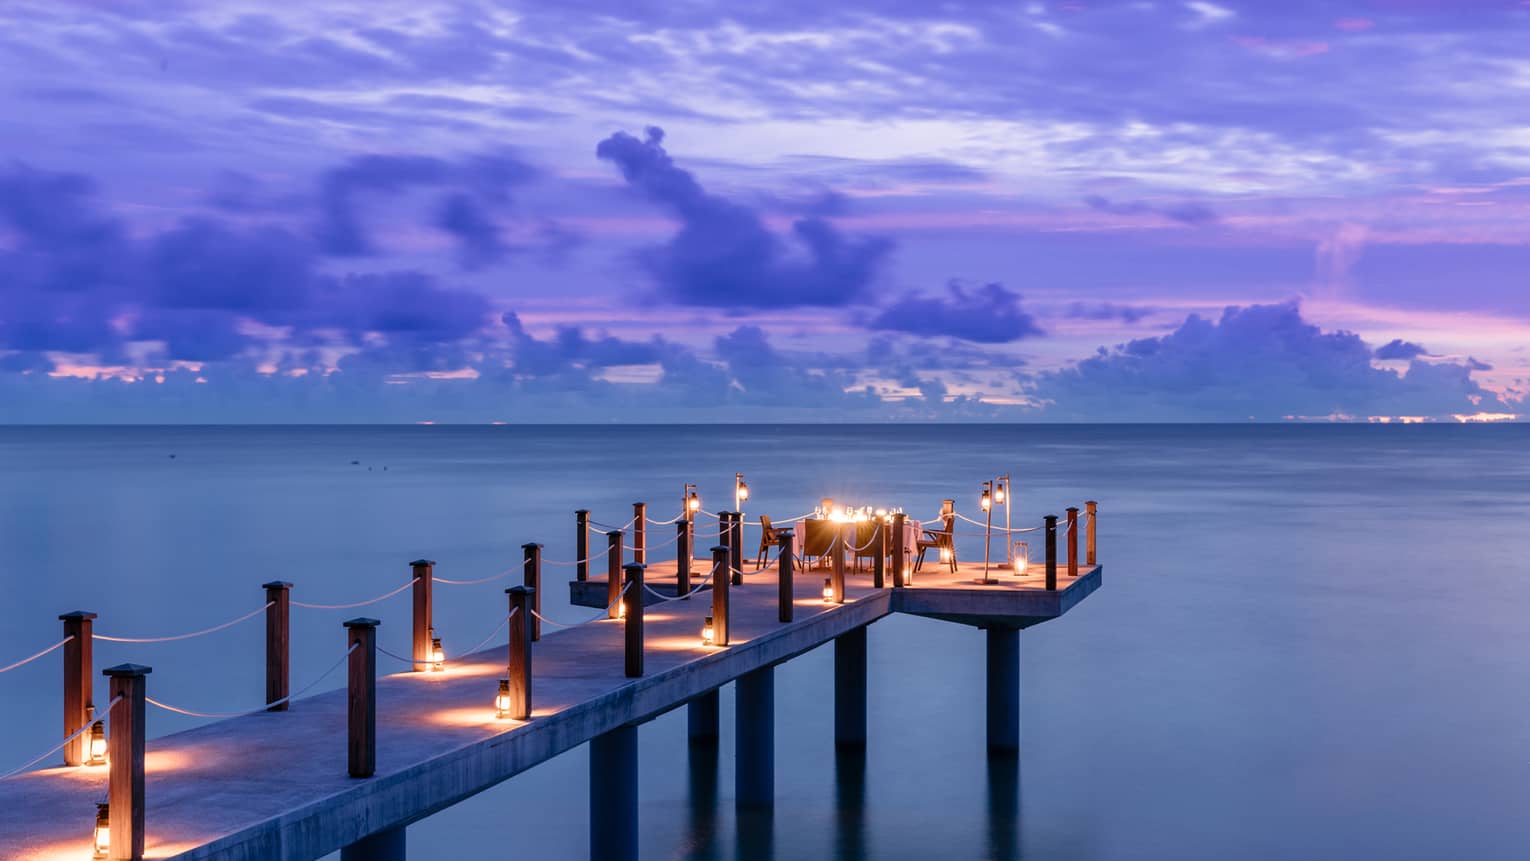 Candlelit jetty off Desroches Island with purple sunset hues